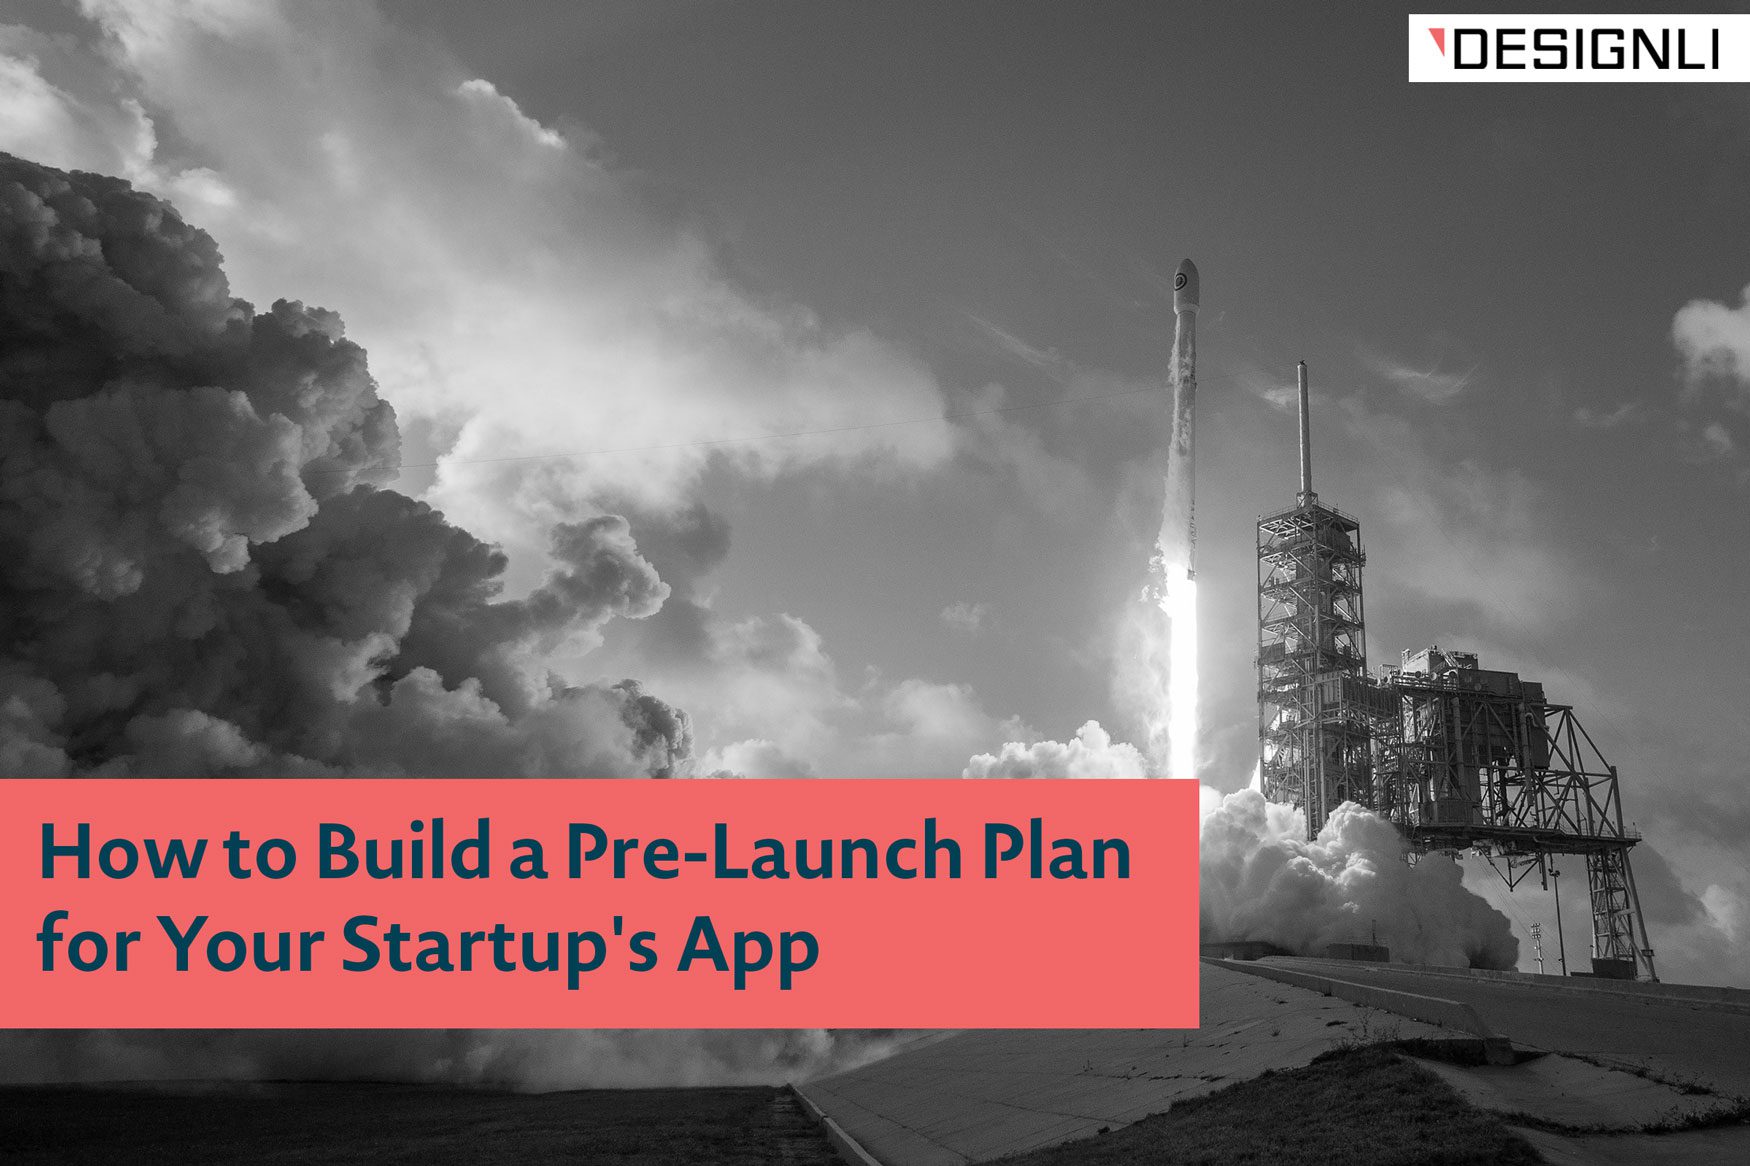 How to Build a Pre-Launch Plan for Your Startup’s App